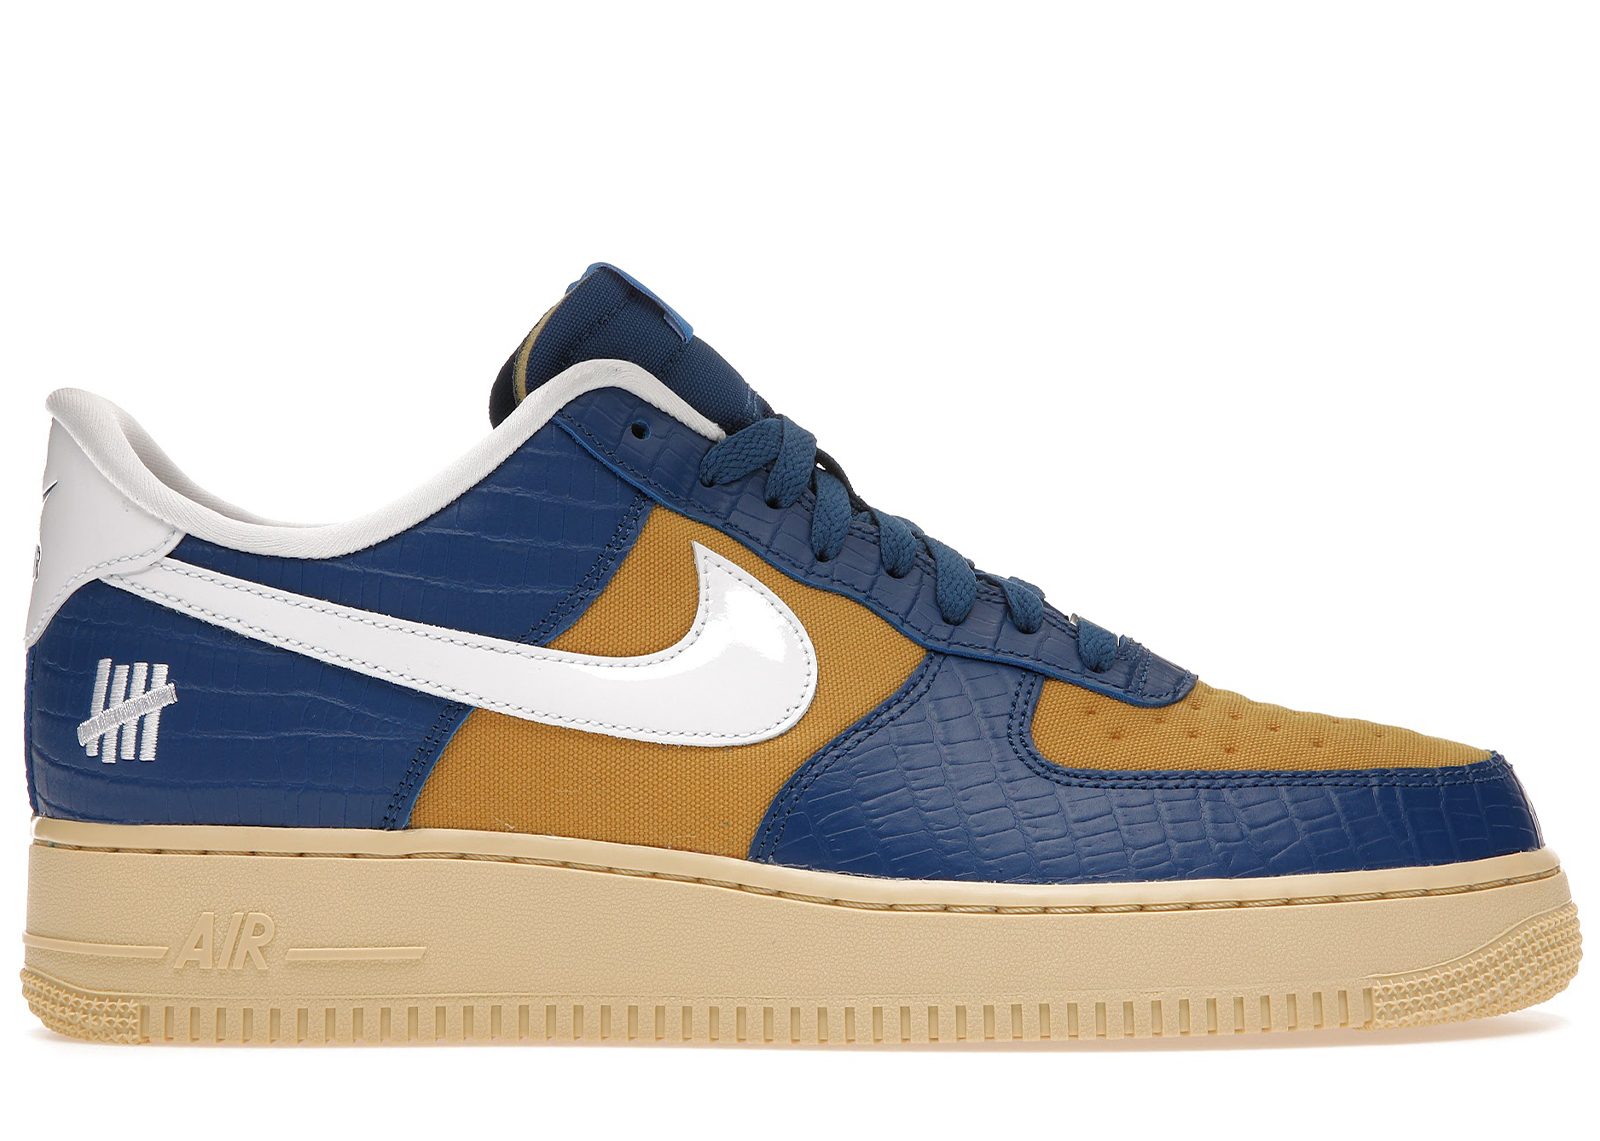 Nike Air Force 1 Low SP Undefeated 5 On It Blue Yellow Croc Men's 